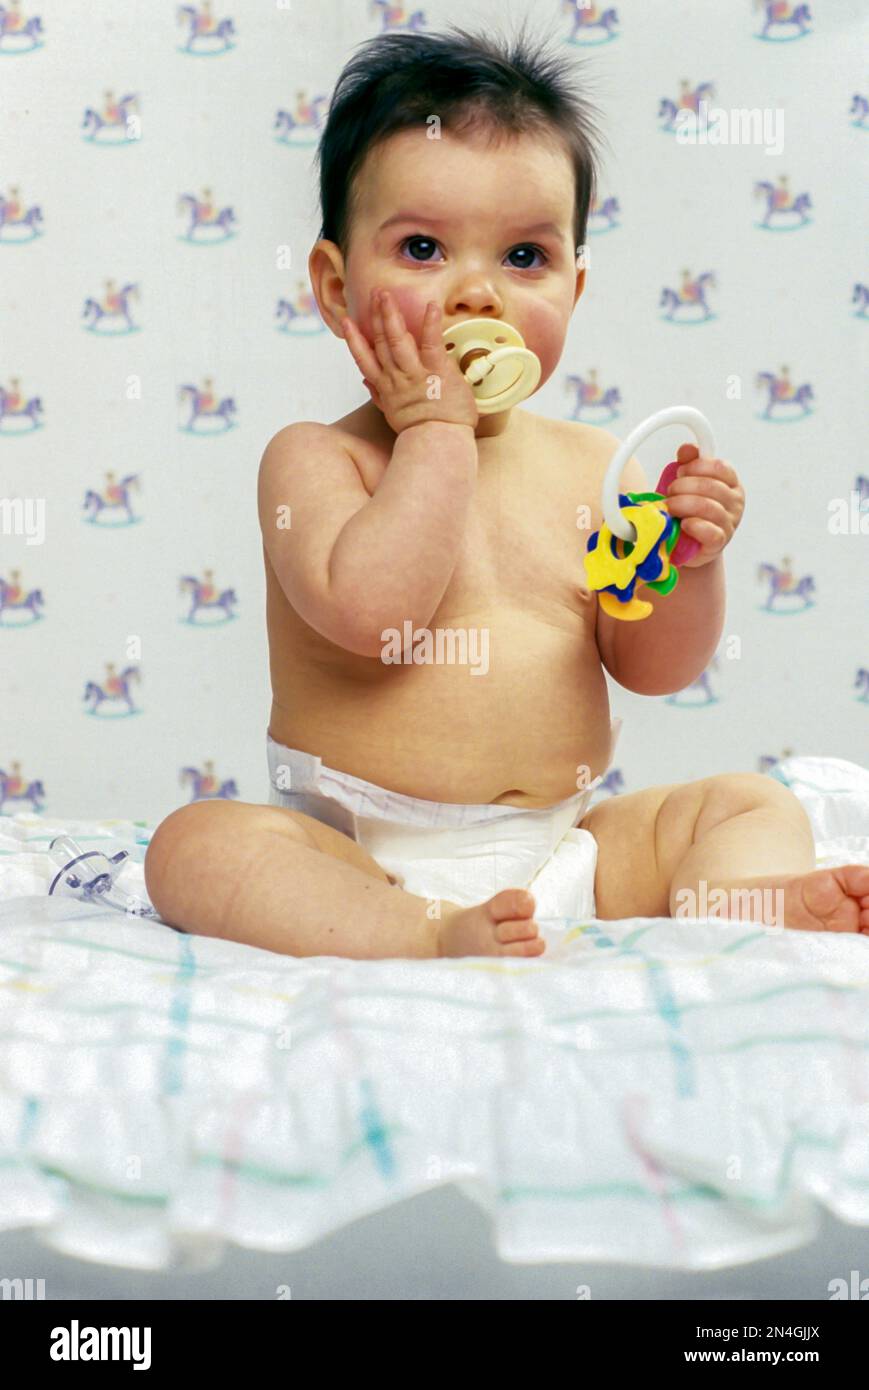 CRYING CAUCASIAN INFANT BABY PLAYING WITH COLORED PLASTIC TOY KEYS Stock Photo